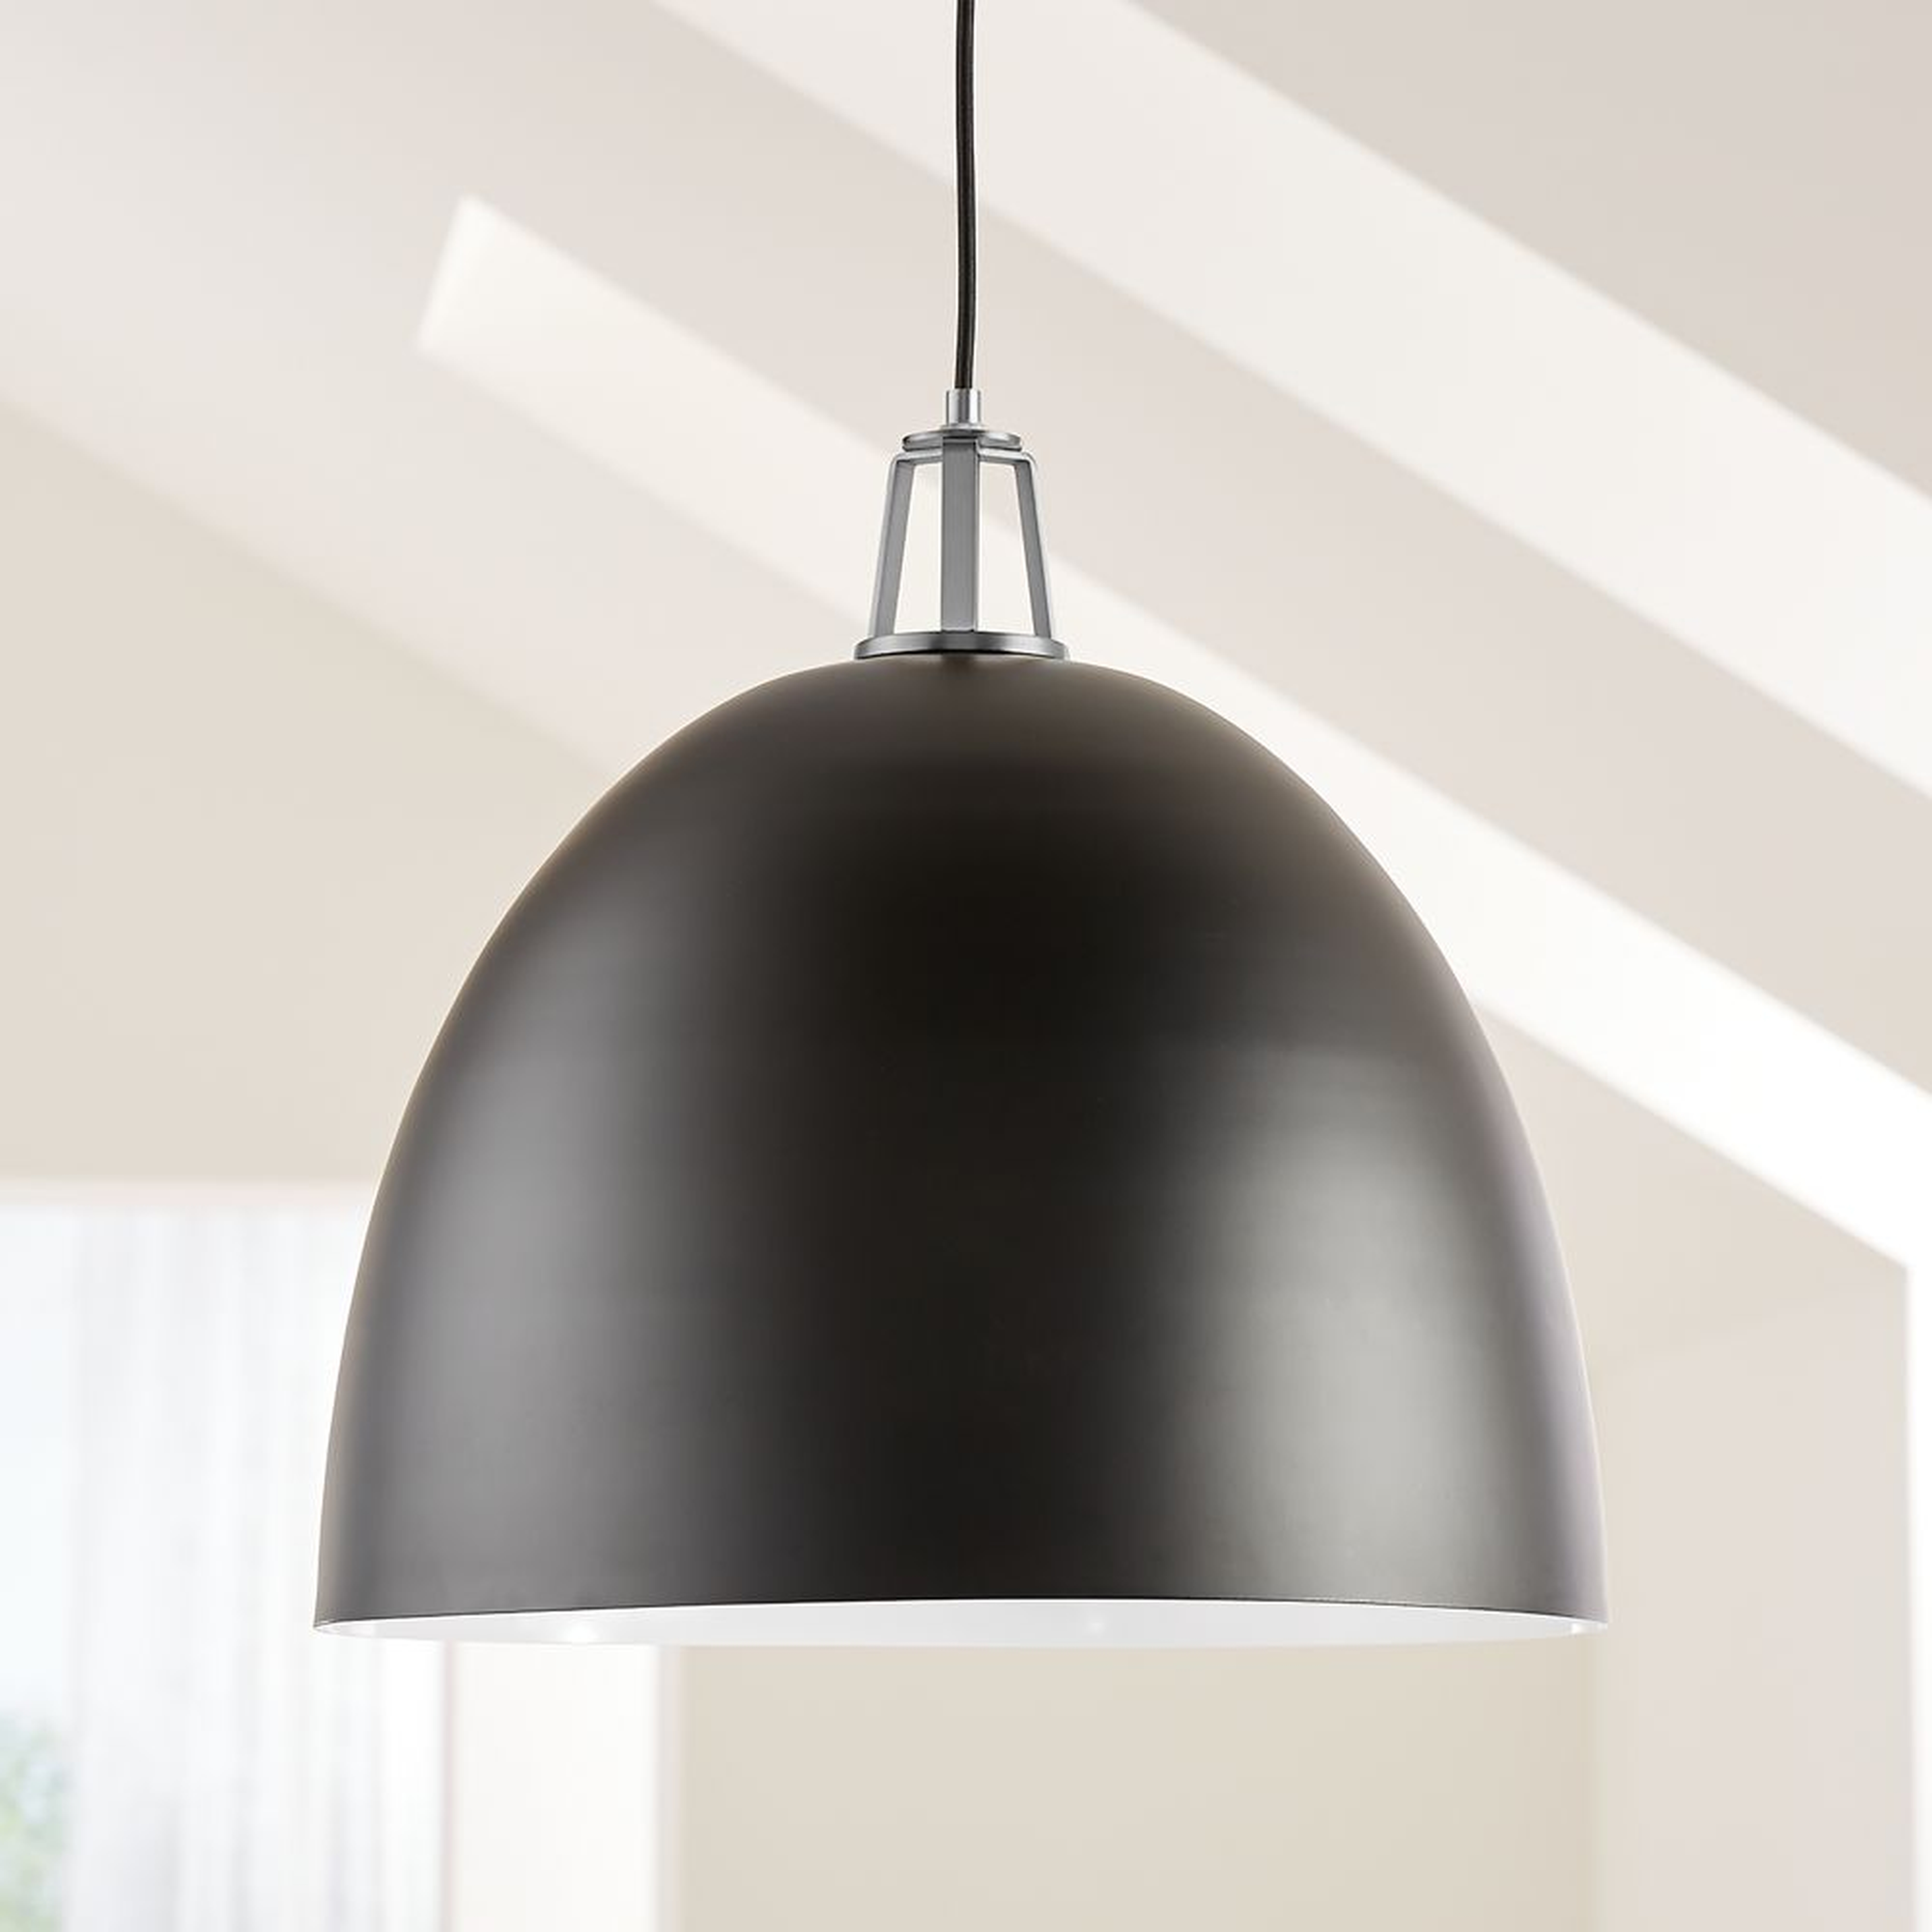 Maddox Black Dome Pendant Large with Nickel Socket - Crate and Barrel